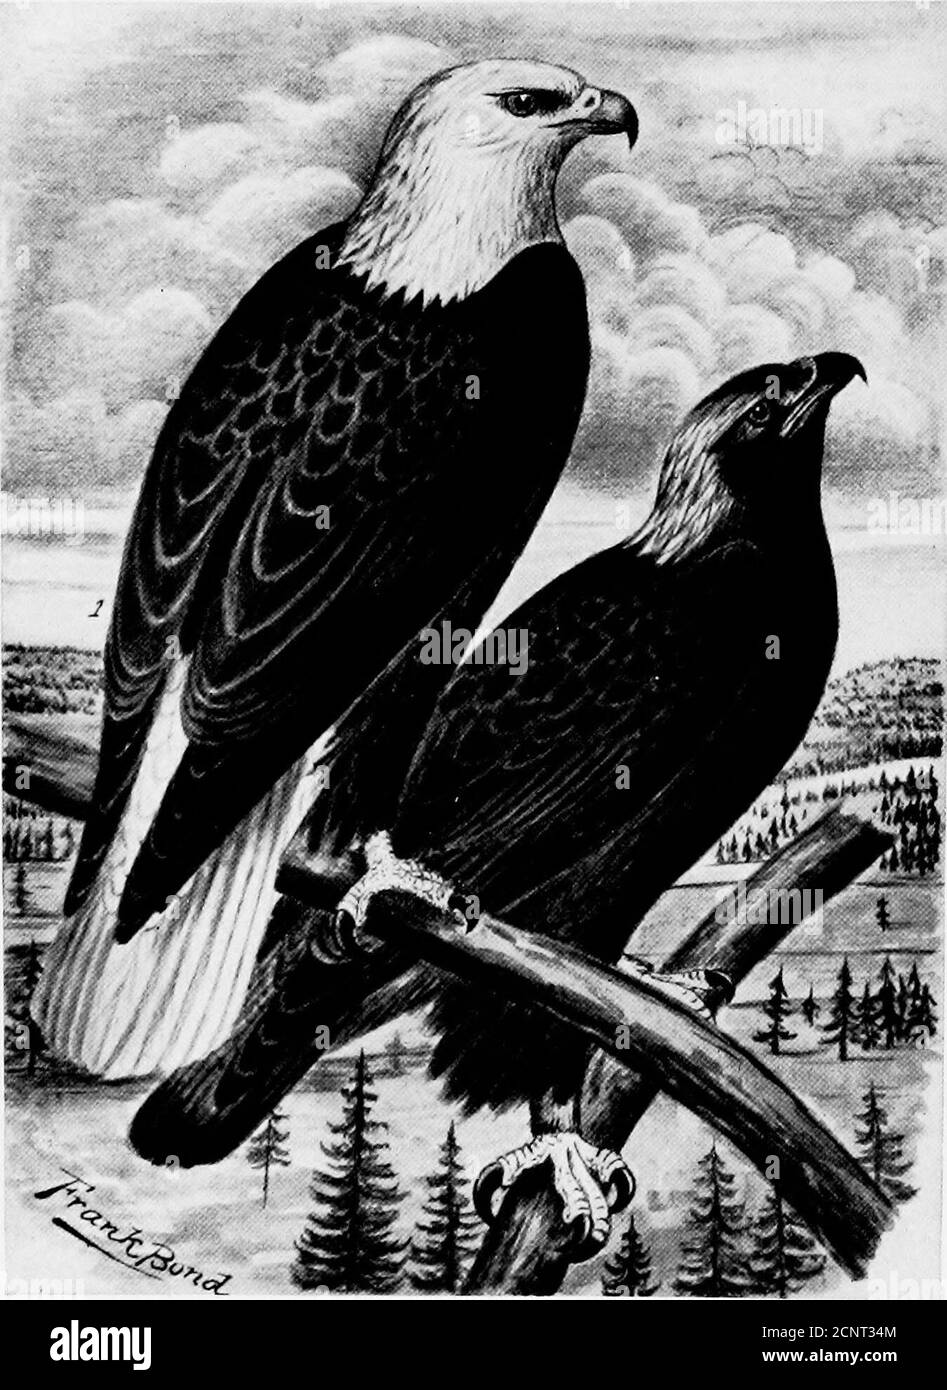 . The birds of Wyoming . BUTEO SWAINSONI.Normal Plumage. Swainsons Hauik.2. Melanistic Plumage.. /. HALI/EETUS LEUCOCEPHALUS. Bald Eagle. AQUILA CHRVSAETOS. Golden Eagle. The Birds of Wyoming. 71 Birds of prey always strike their talons deeply intotheir quarry before carrying it off, unless they are interruptedat the moment they strike. It is possible that.some of thestories found in the older books, especially those rela.ting toEurope, may be true, but we know of no authentic instancewithin the past fifty years of Eagles attacking children. On page 96 of the same publication, Fisher refers to Stock Photo